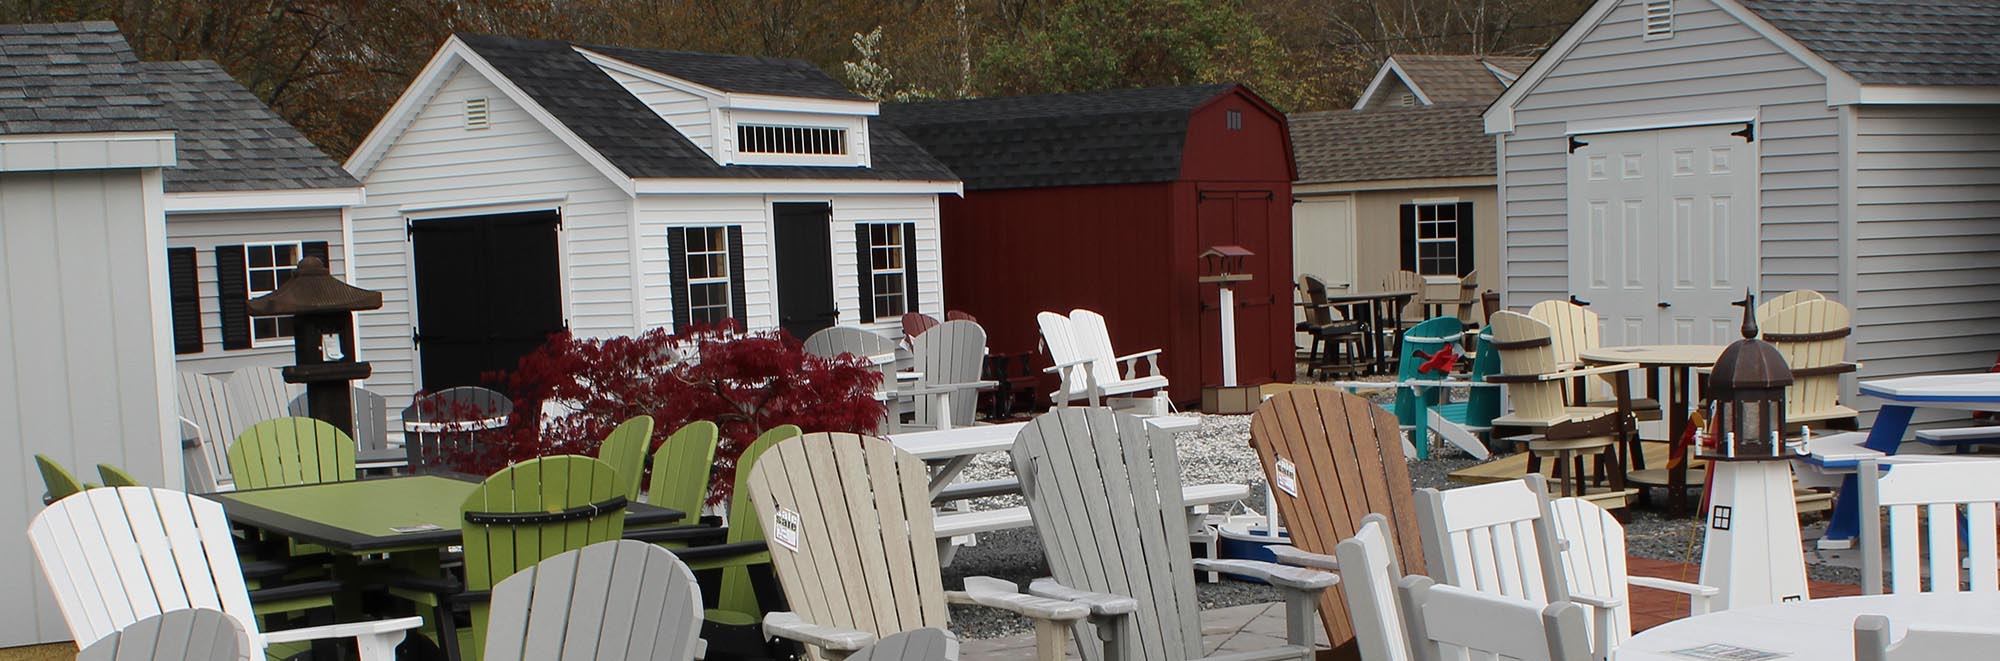 Adirondack chairs and Sheds in Background